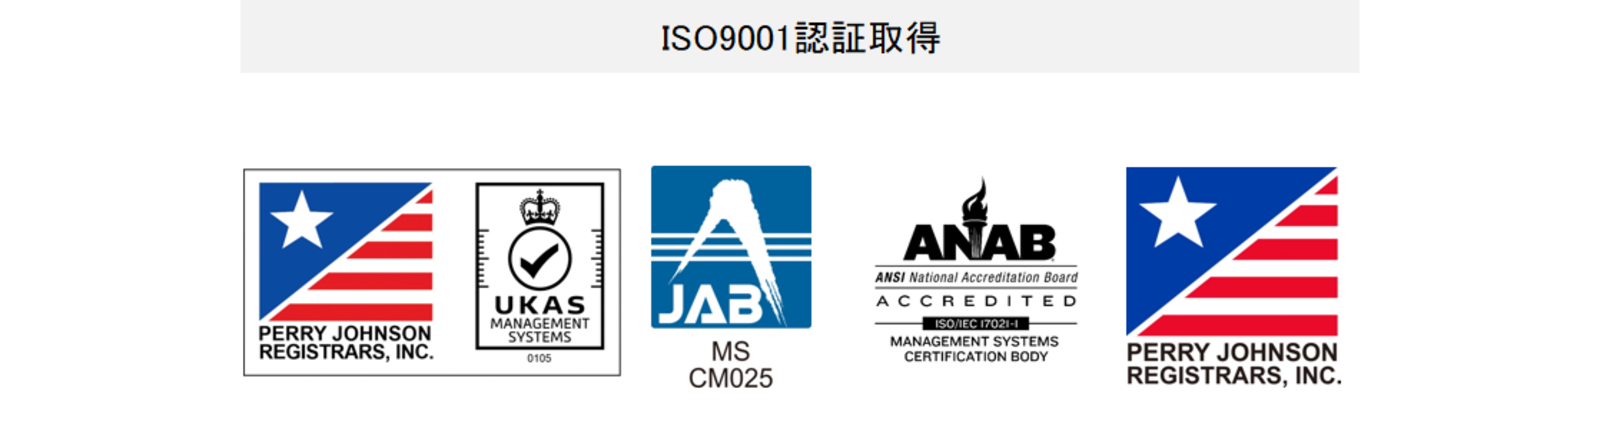 ISO9001認証取得 Perry Johnson Registrars-Quality Assurance UKAS management systems JAB MS CM023 The ANSI National Accreditation Board